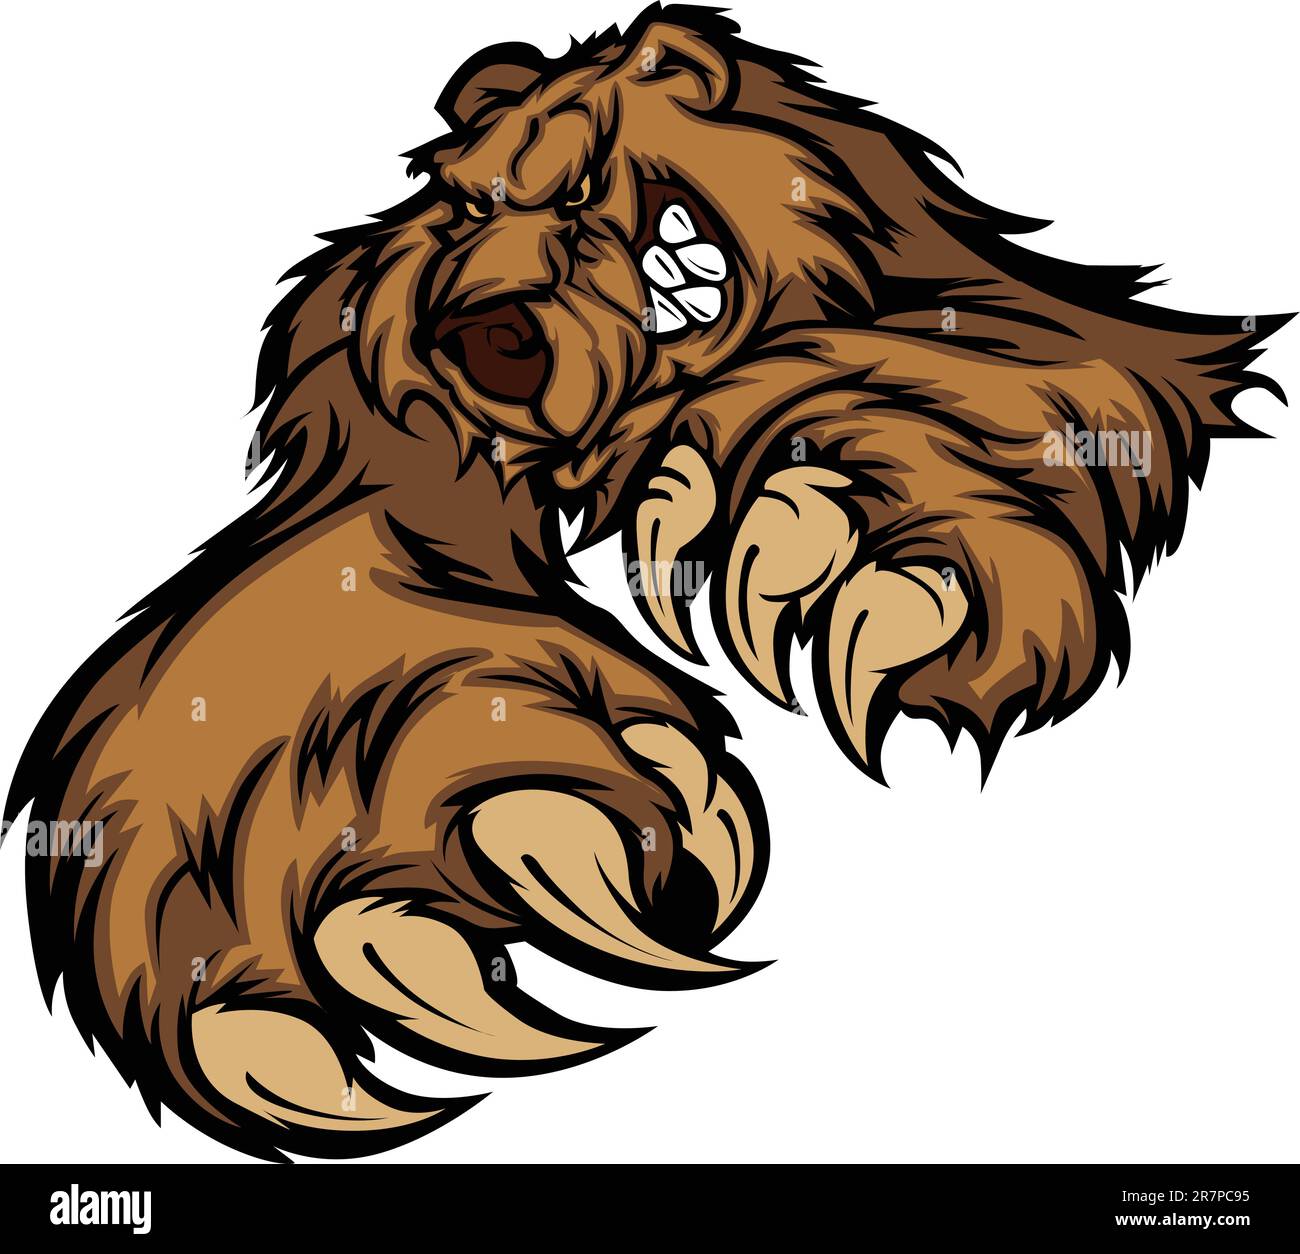 Bear Mascot snarling Reaching with Claws and Paws Vector Image Illustrazione Vettoriale